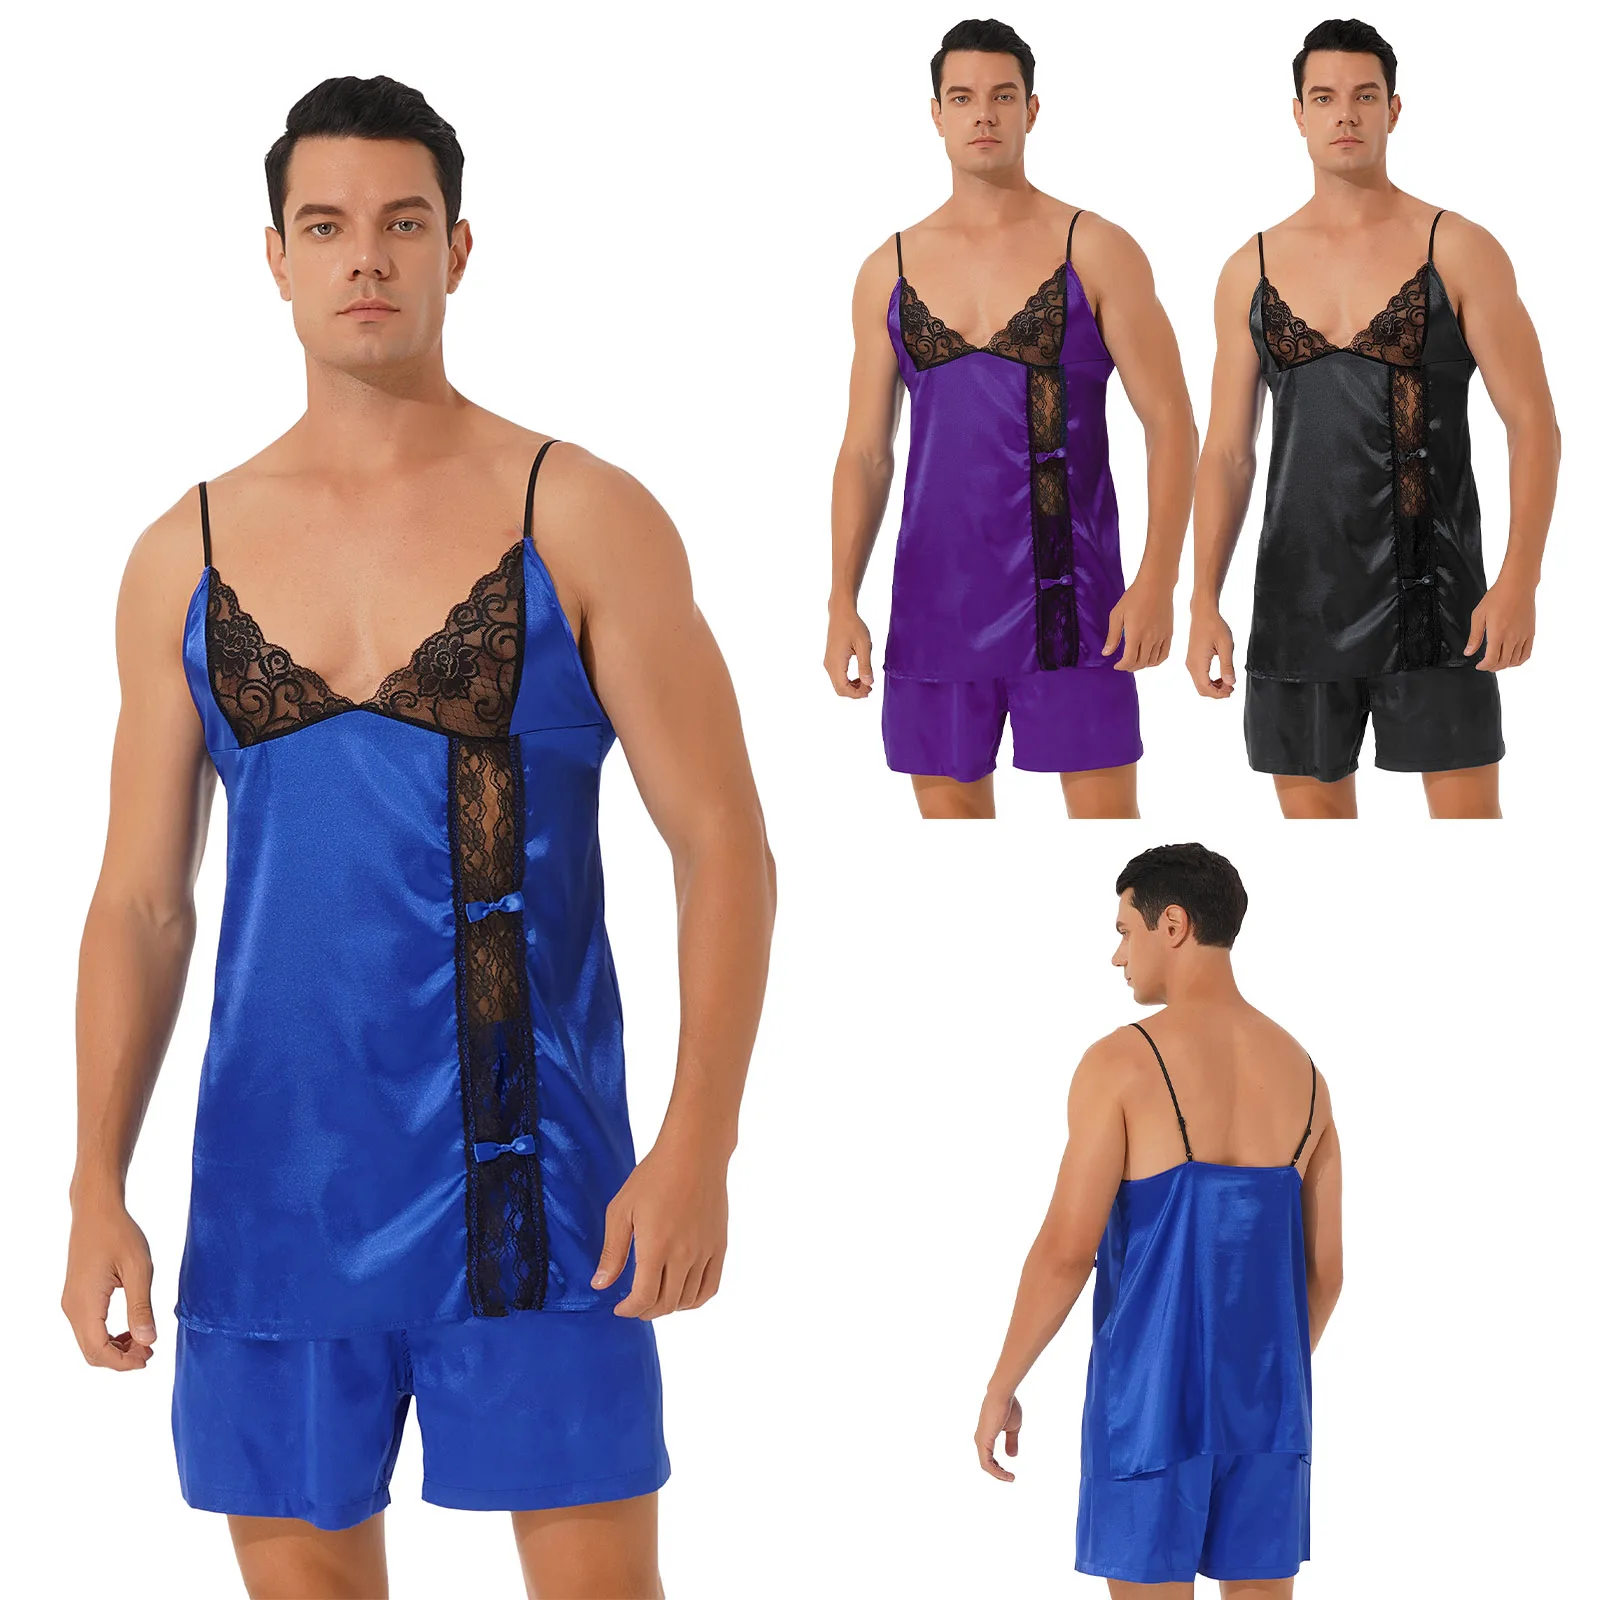 Mens Erotic Sissy Nightwear Lace Lingerie Set Straps Deep V Neck Top with Shorts Sexy Underwear Sets mens silk pajama set